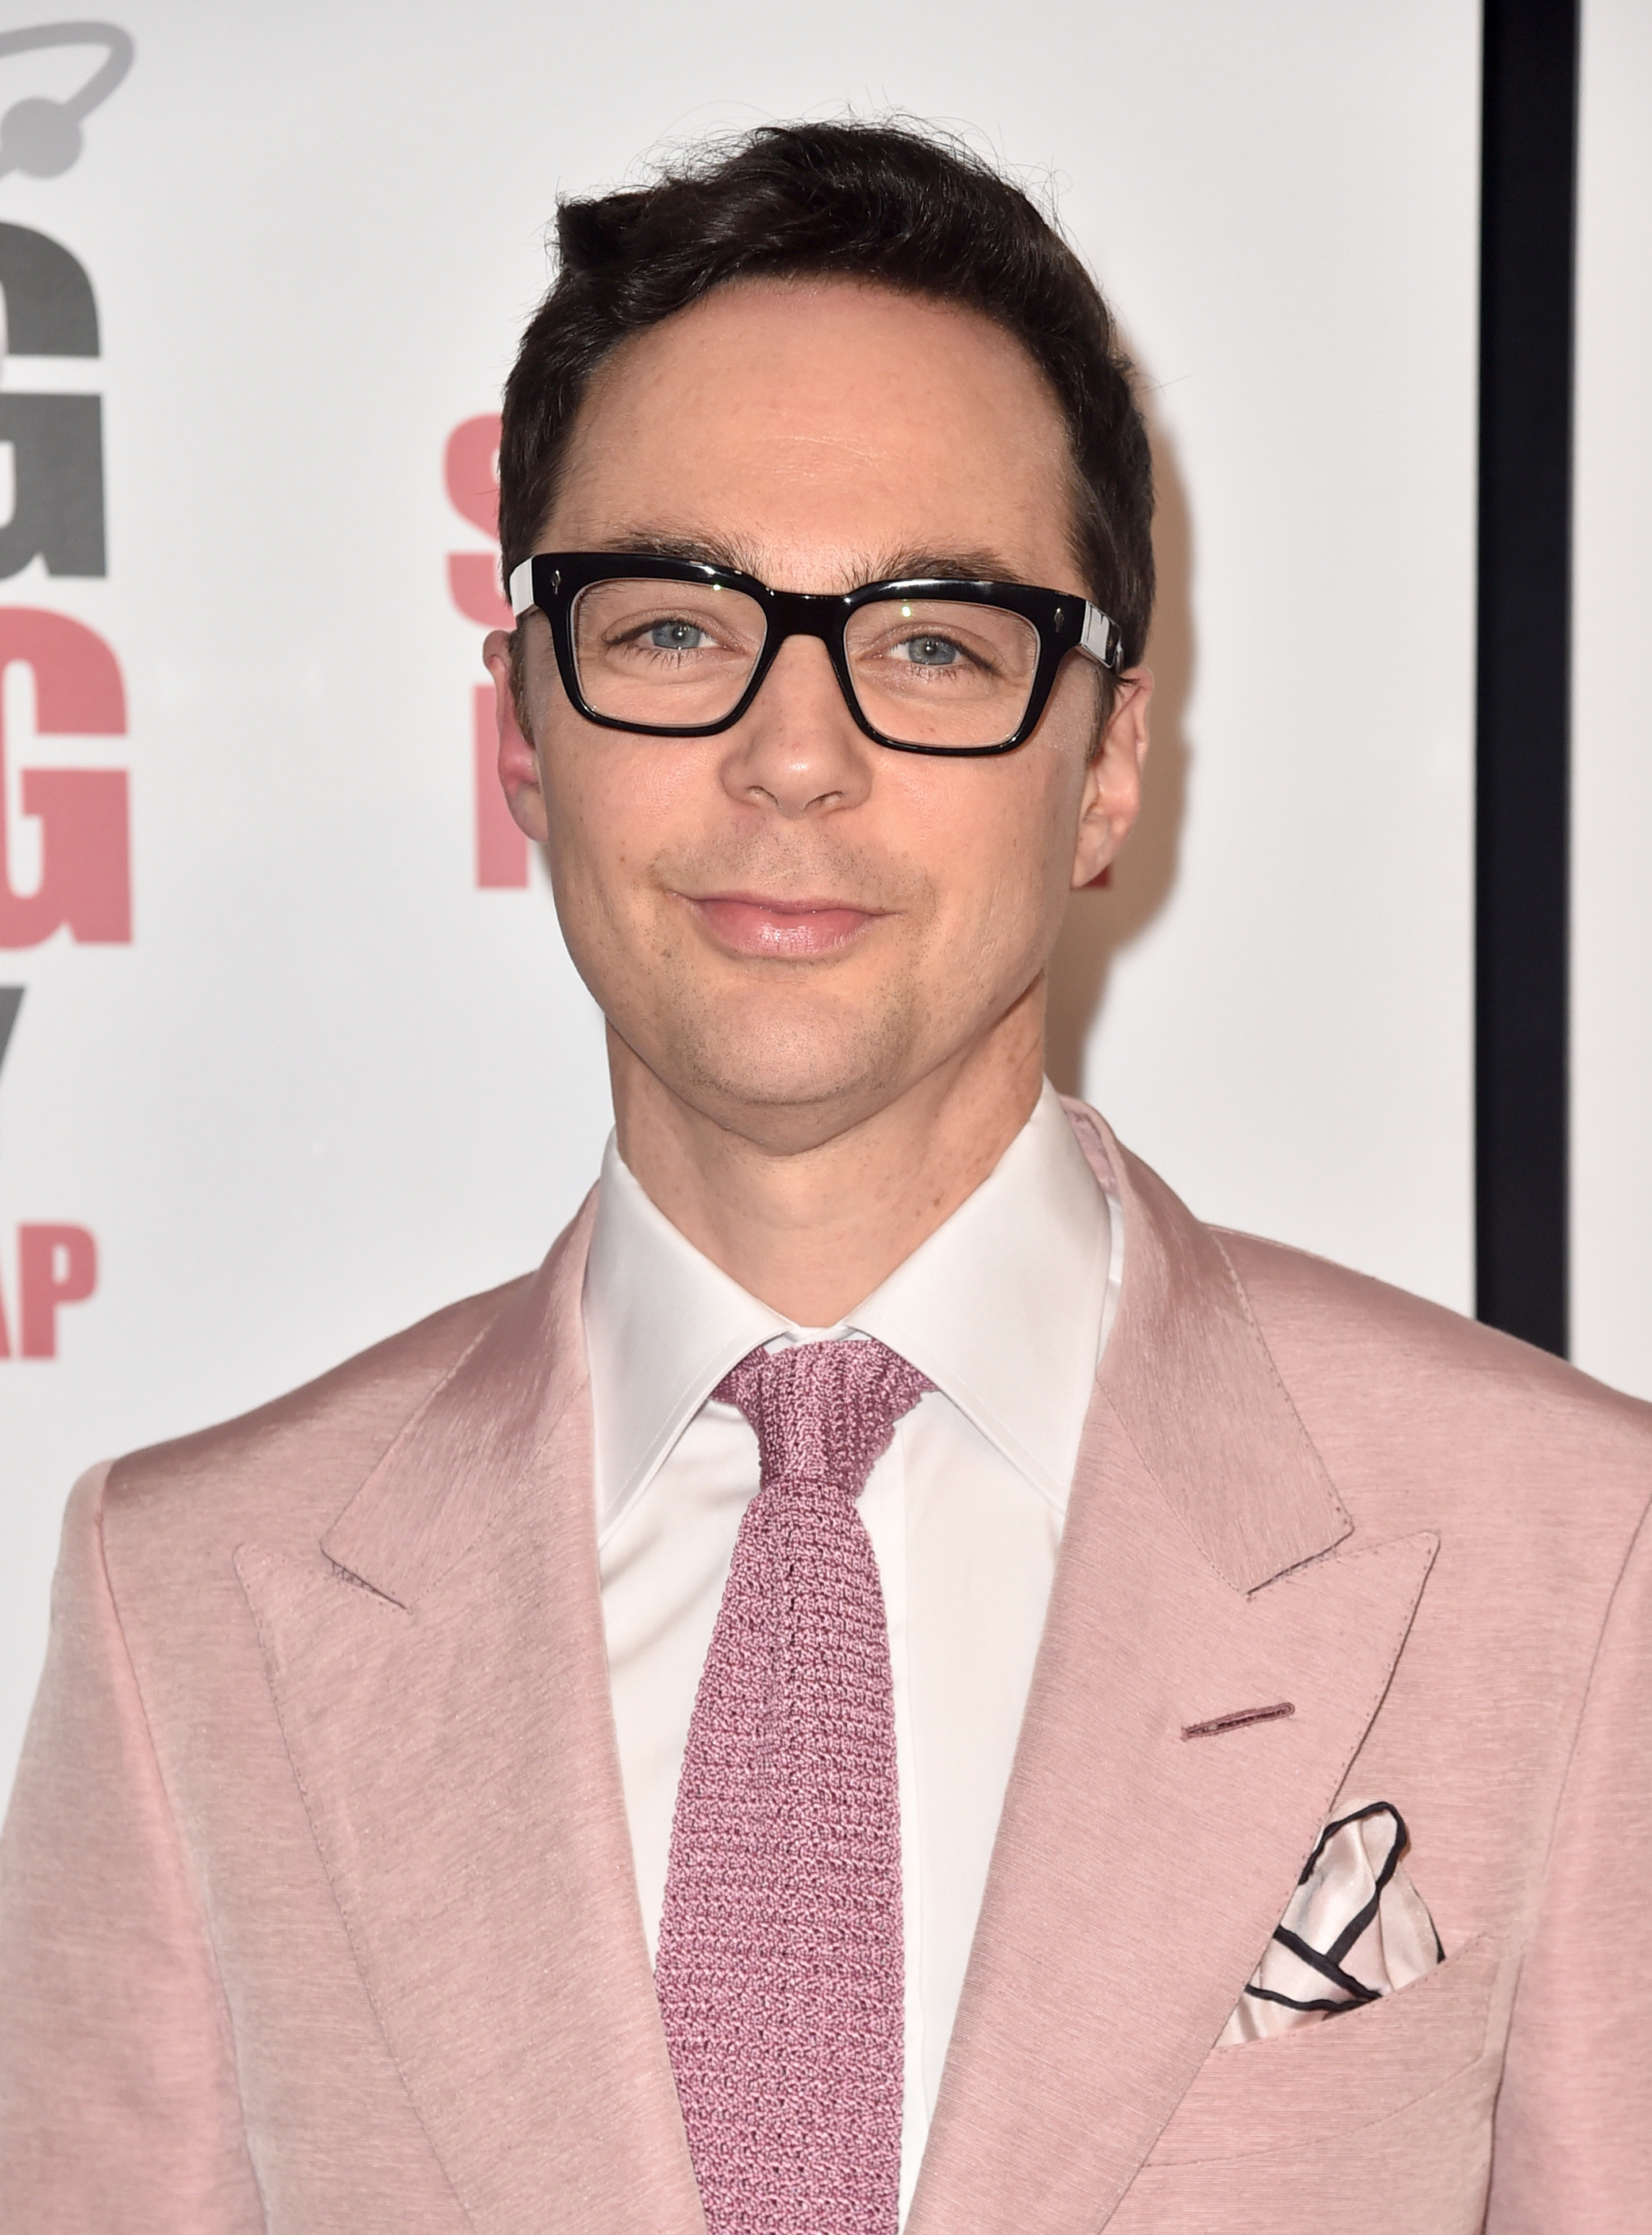 A closeup of Jim Parsons at a red carpet event wearing a suit and tie